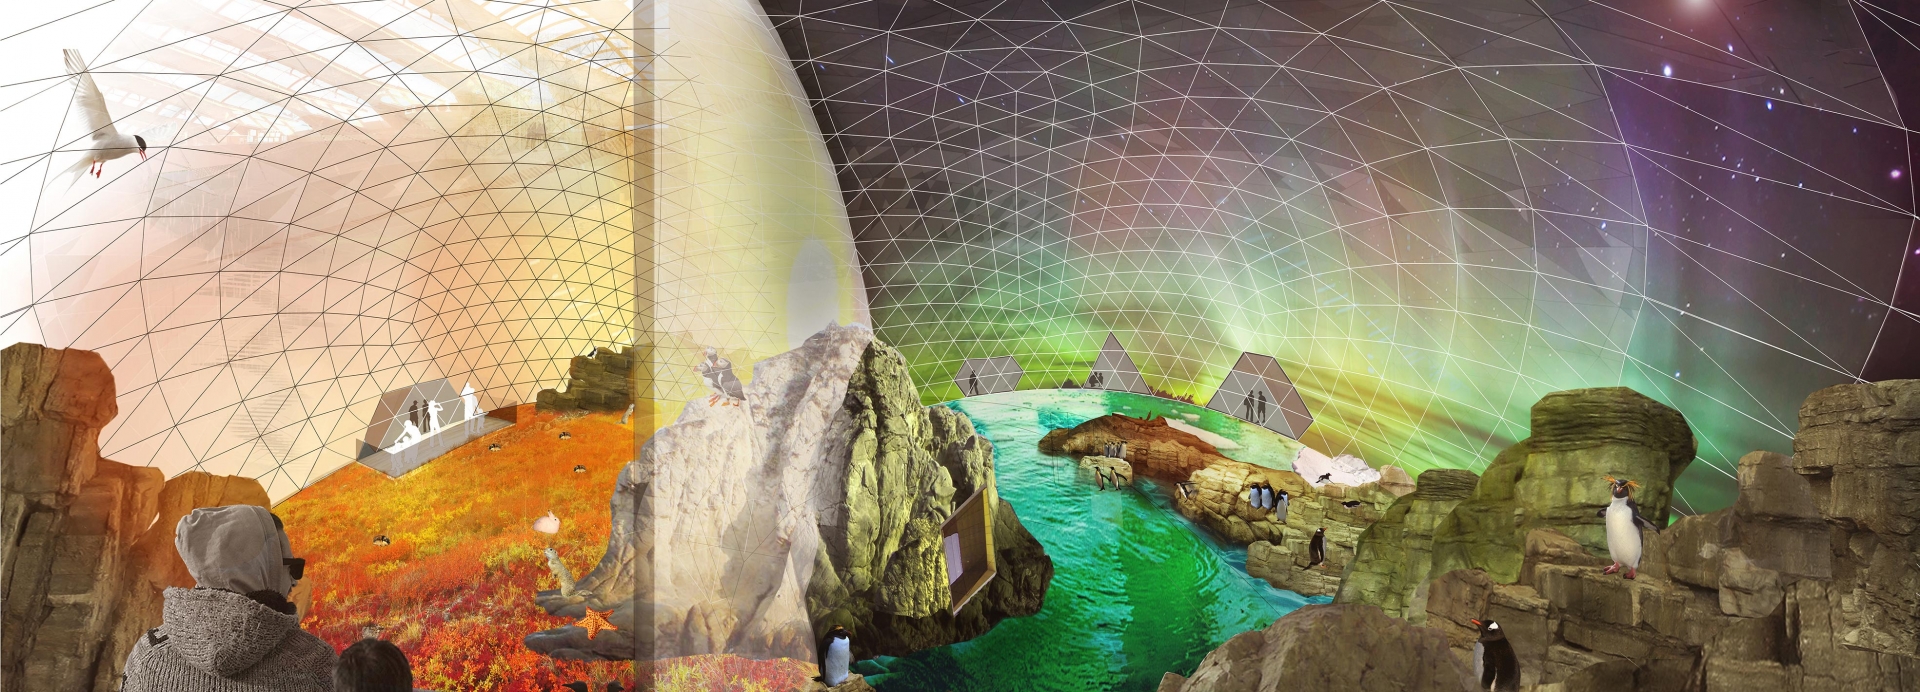 Design competition for the renewal of the Montreal Biodome